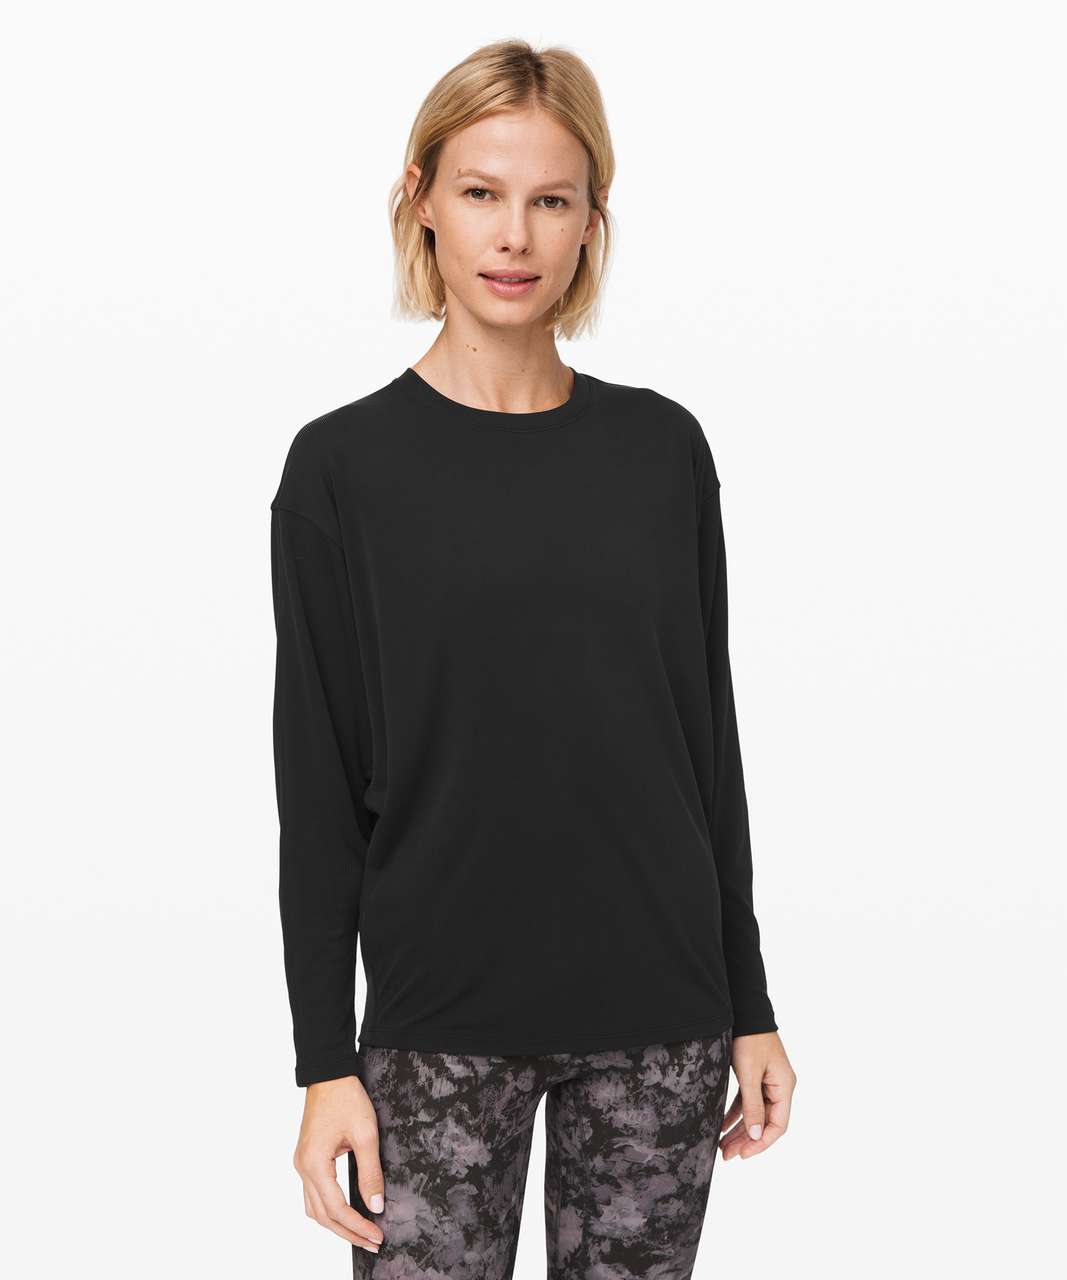 Lululemon Loungeful Crewneck Pullover NWT Size 4 Black Relaxed Fit 4 Way  Stretch